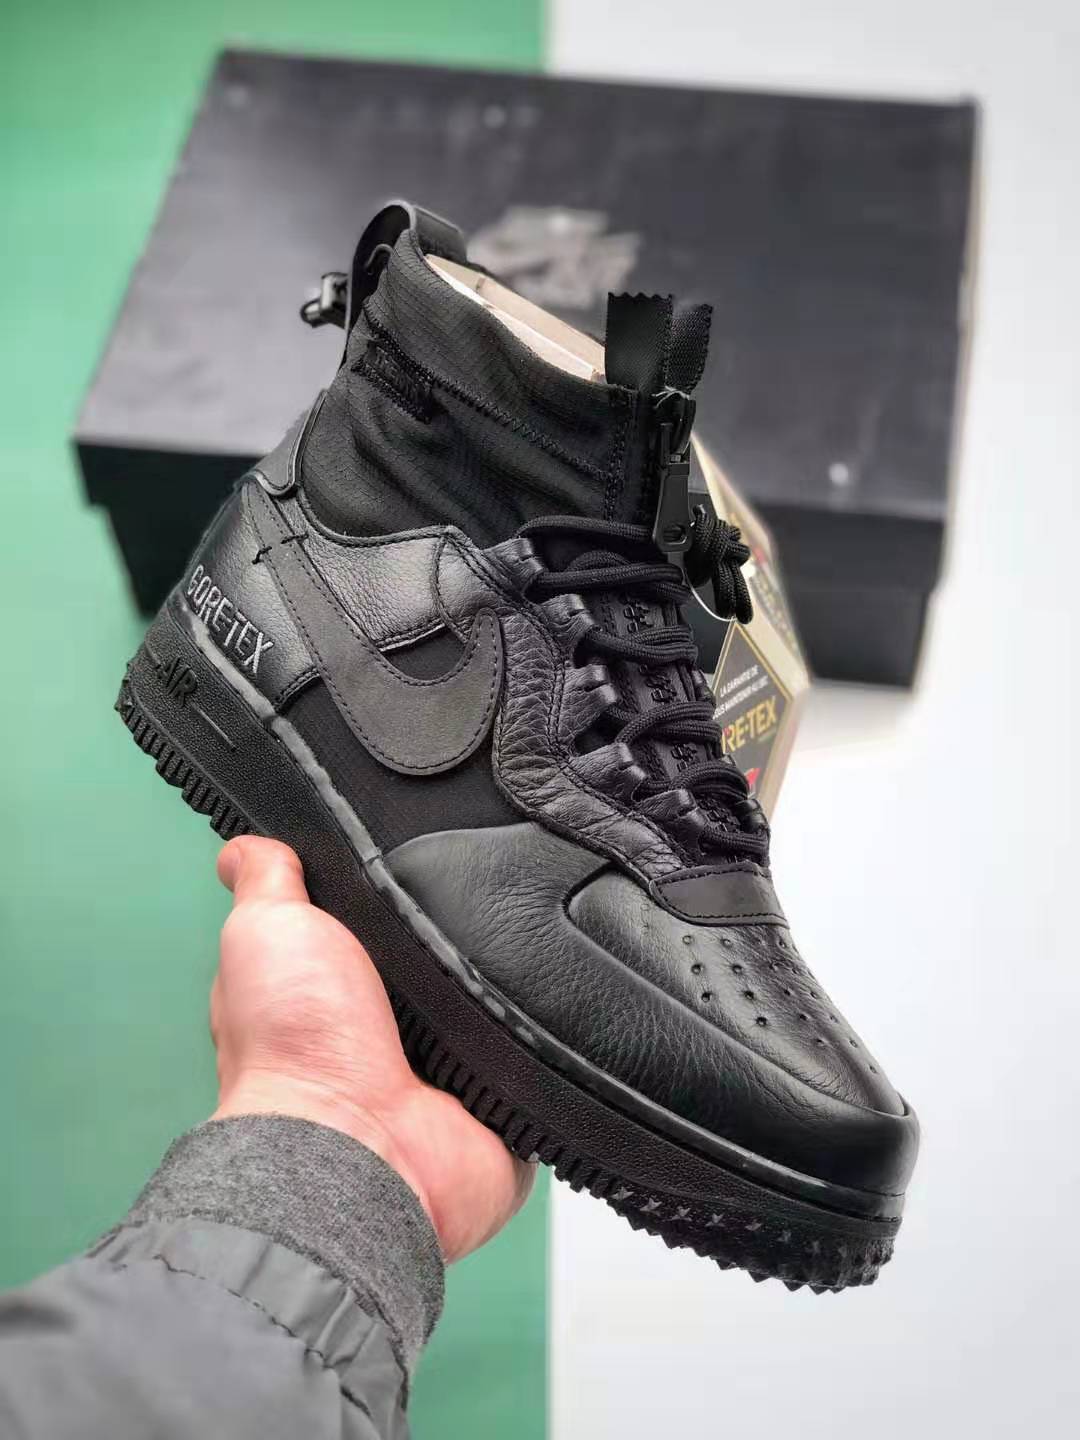 Nike Air Force 1 High Gore-Tex Triple Black CQ7211-003 - Water-resistant and stylish sneakers by Nike